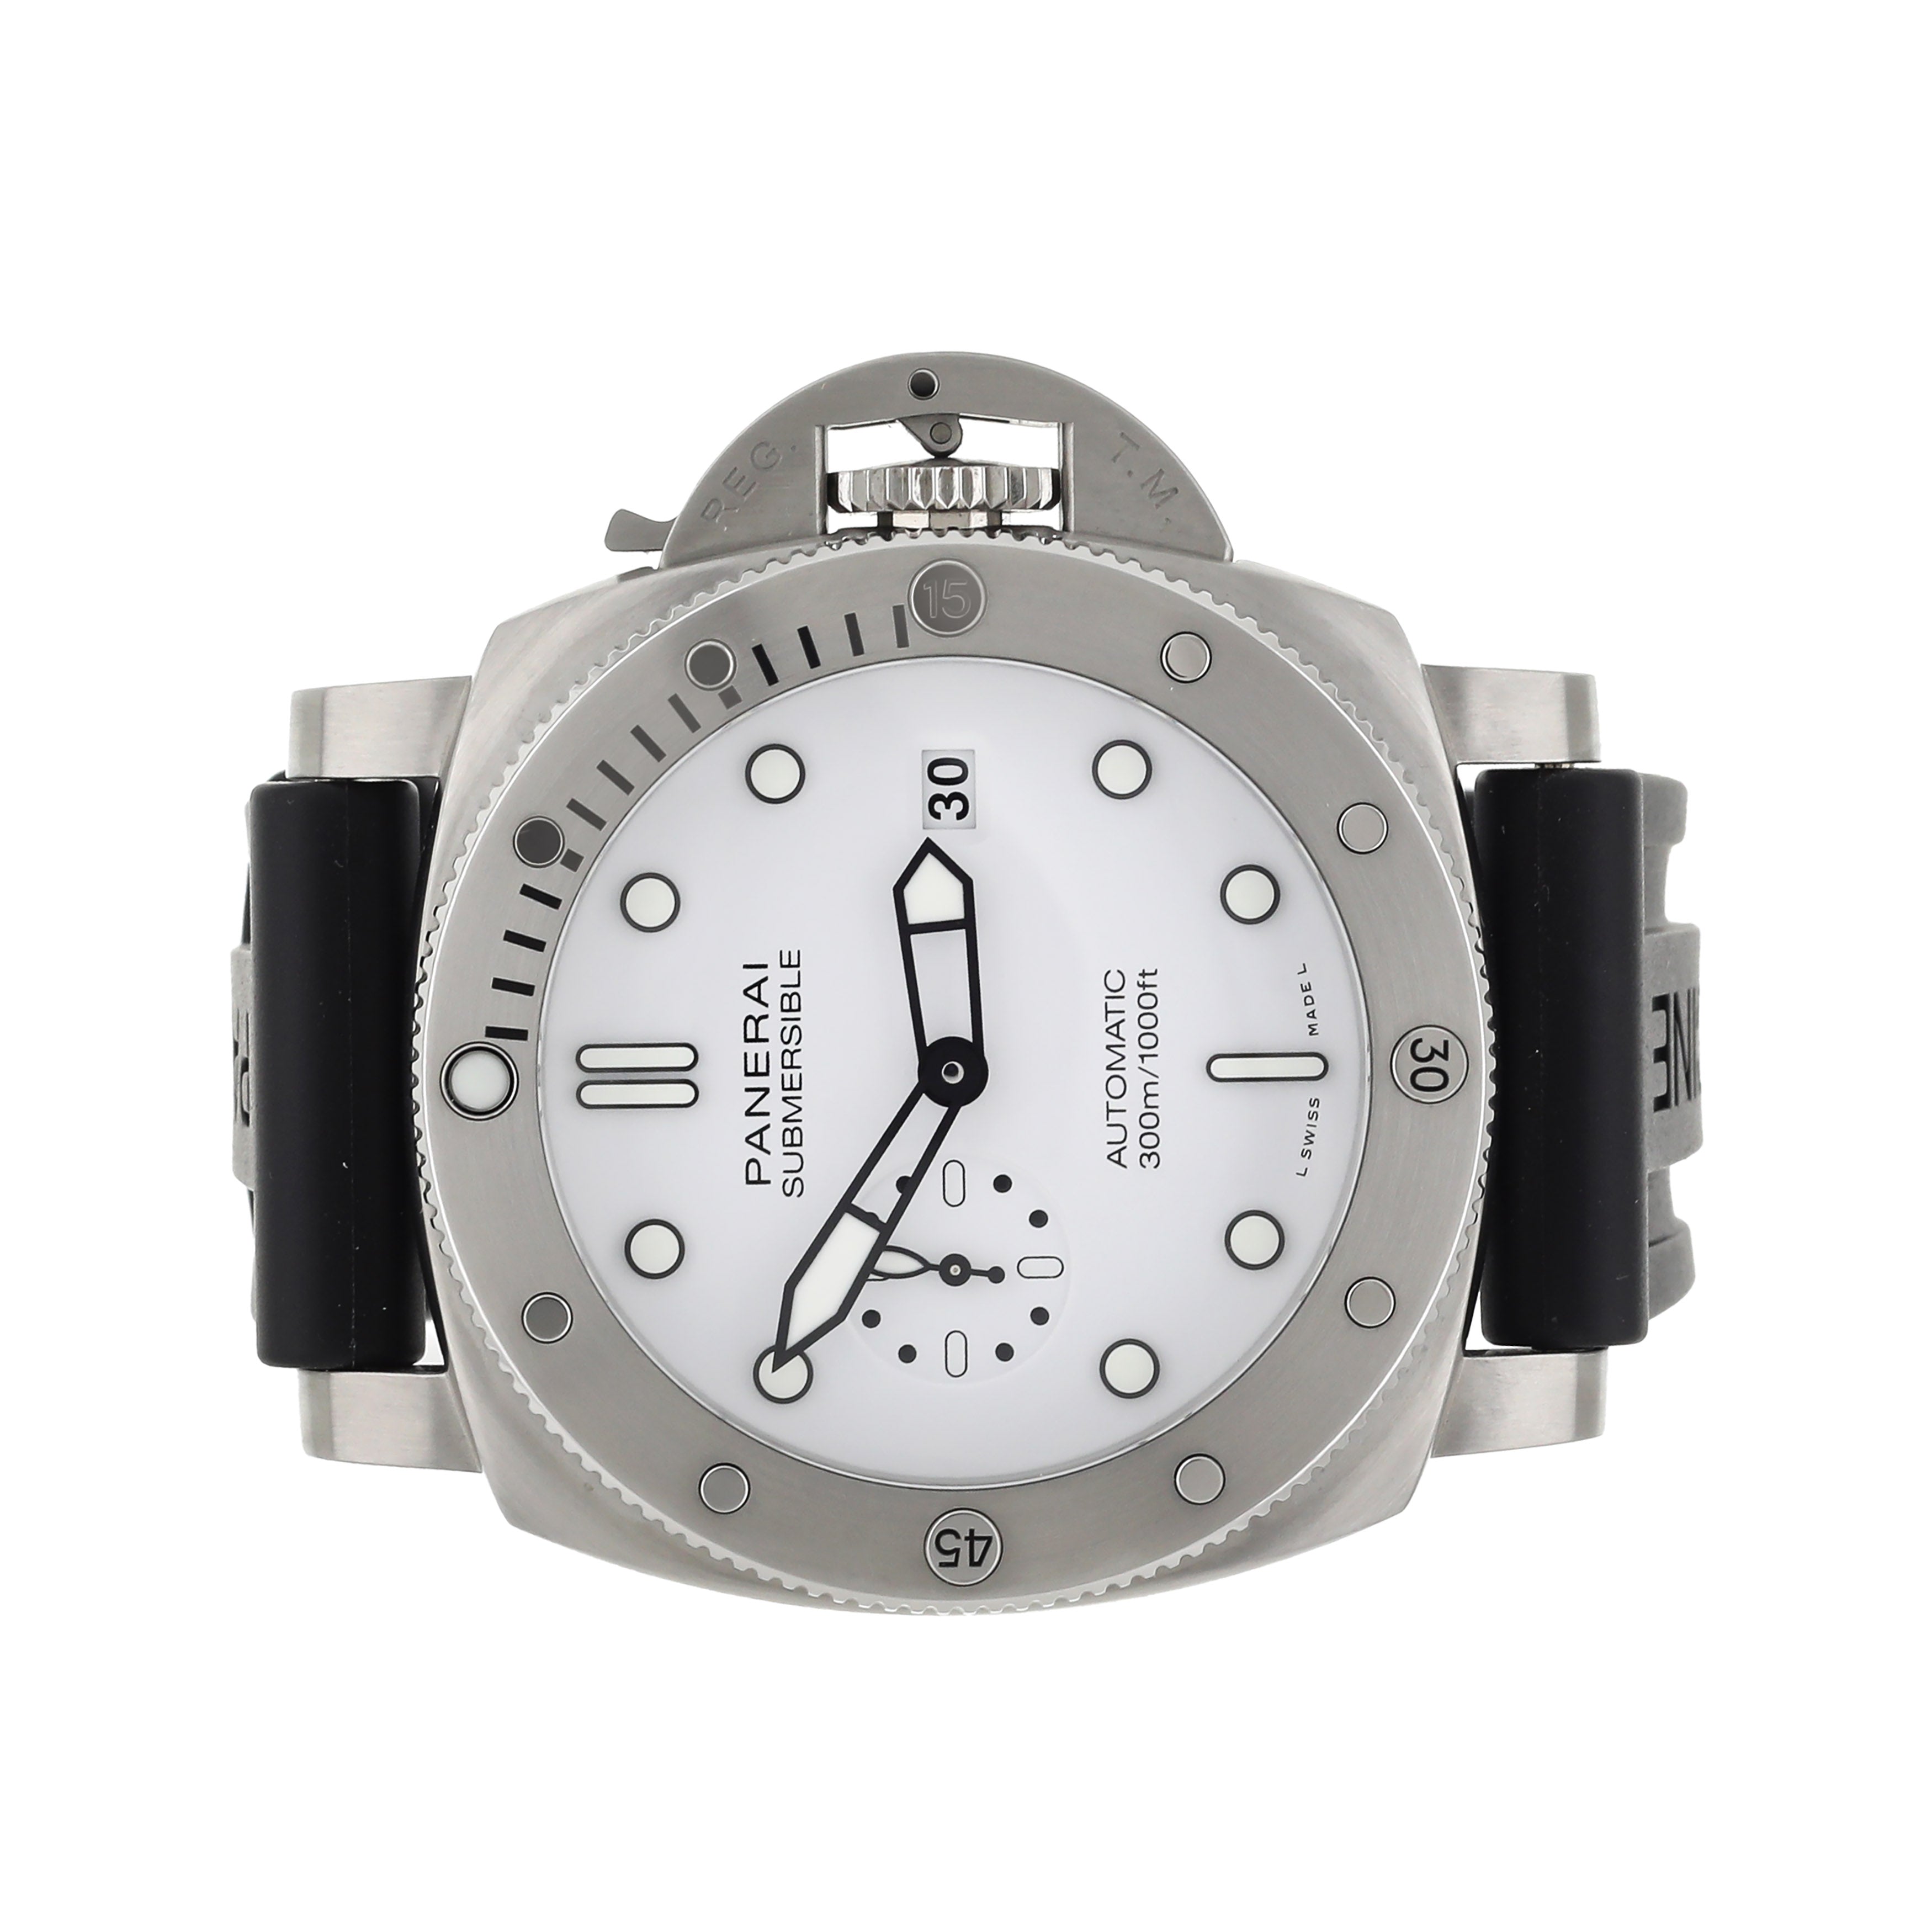 PANERAI SUBMERSIBLE 44 STAINLESS STEEL WHITE DIAL 44MM PAM01226 FULL SET